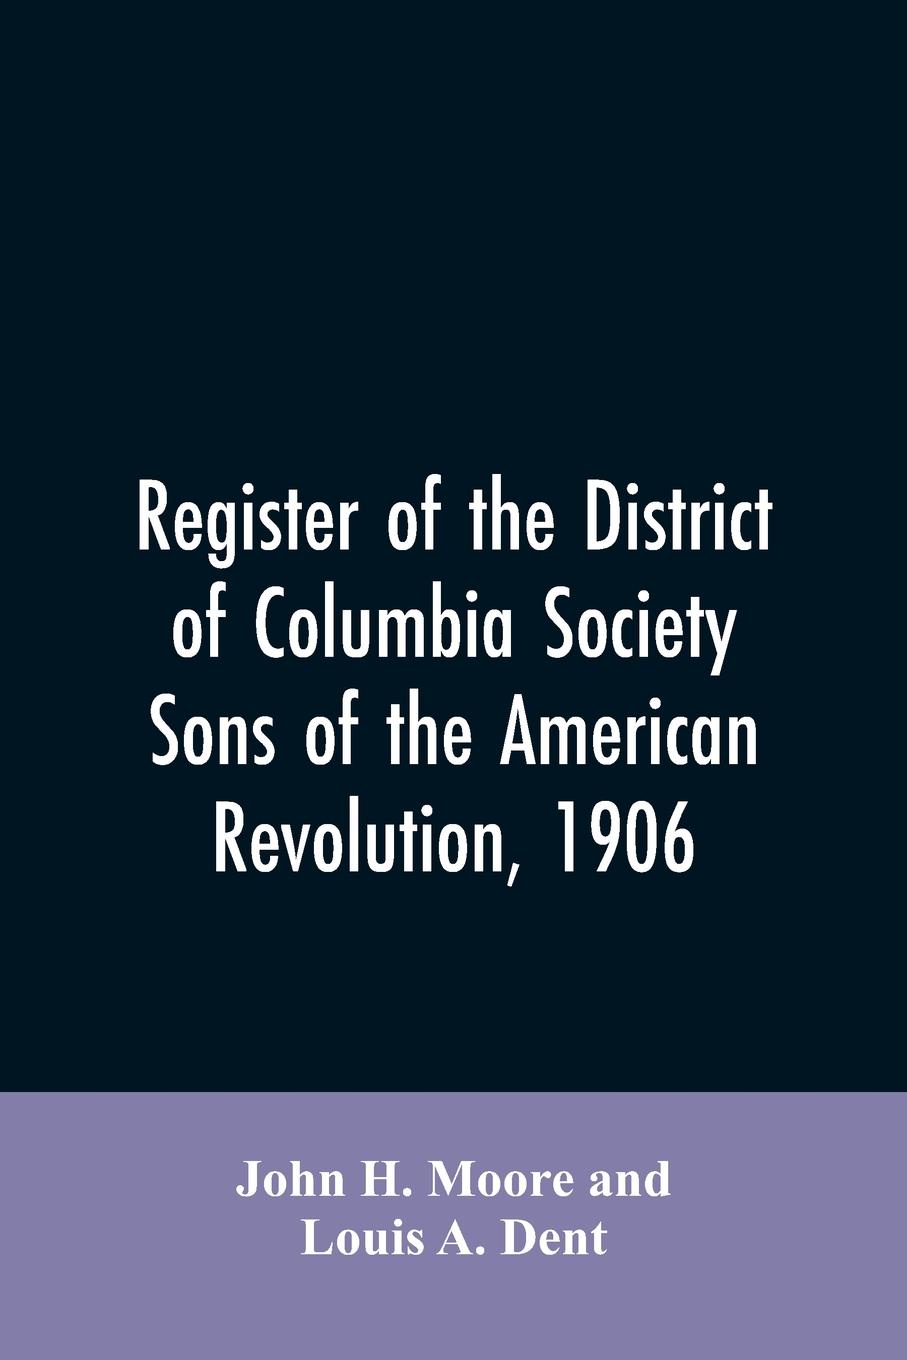 Register of the District of Columbia society, Sons of the American Revolution, 1906